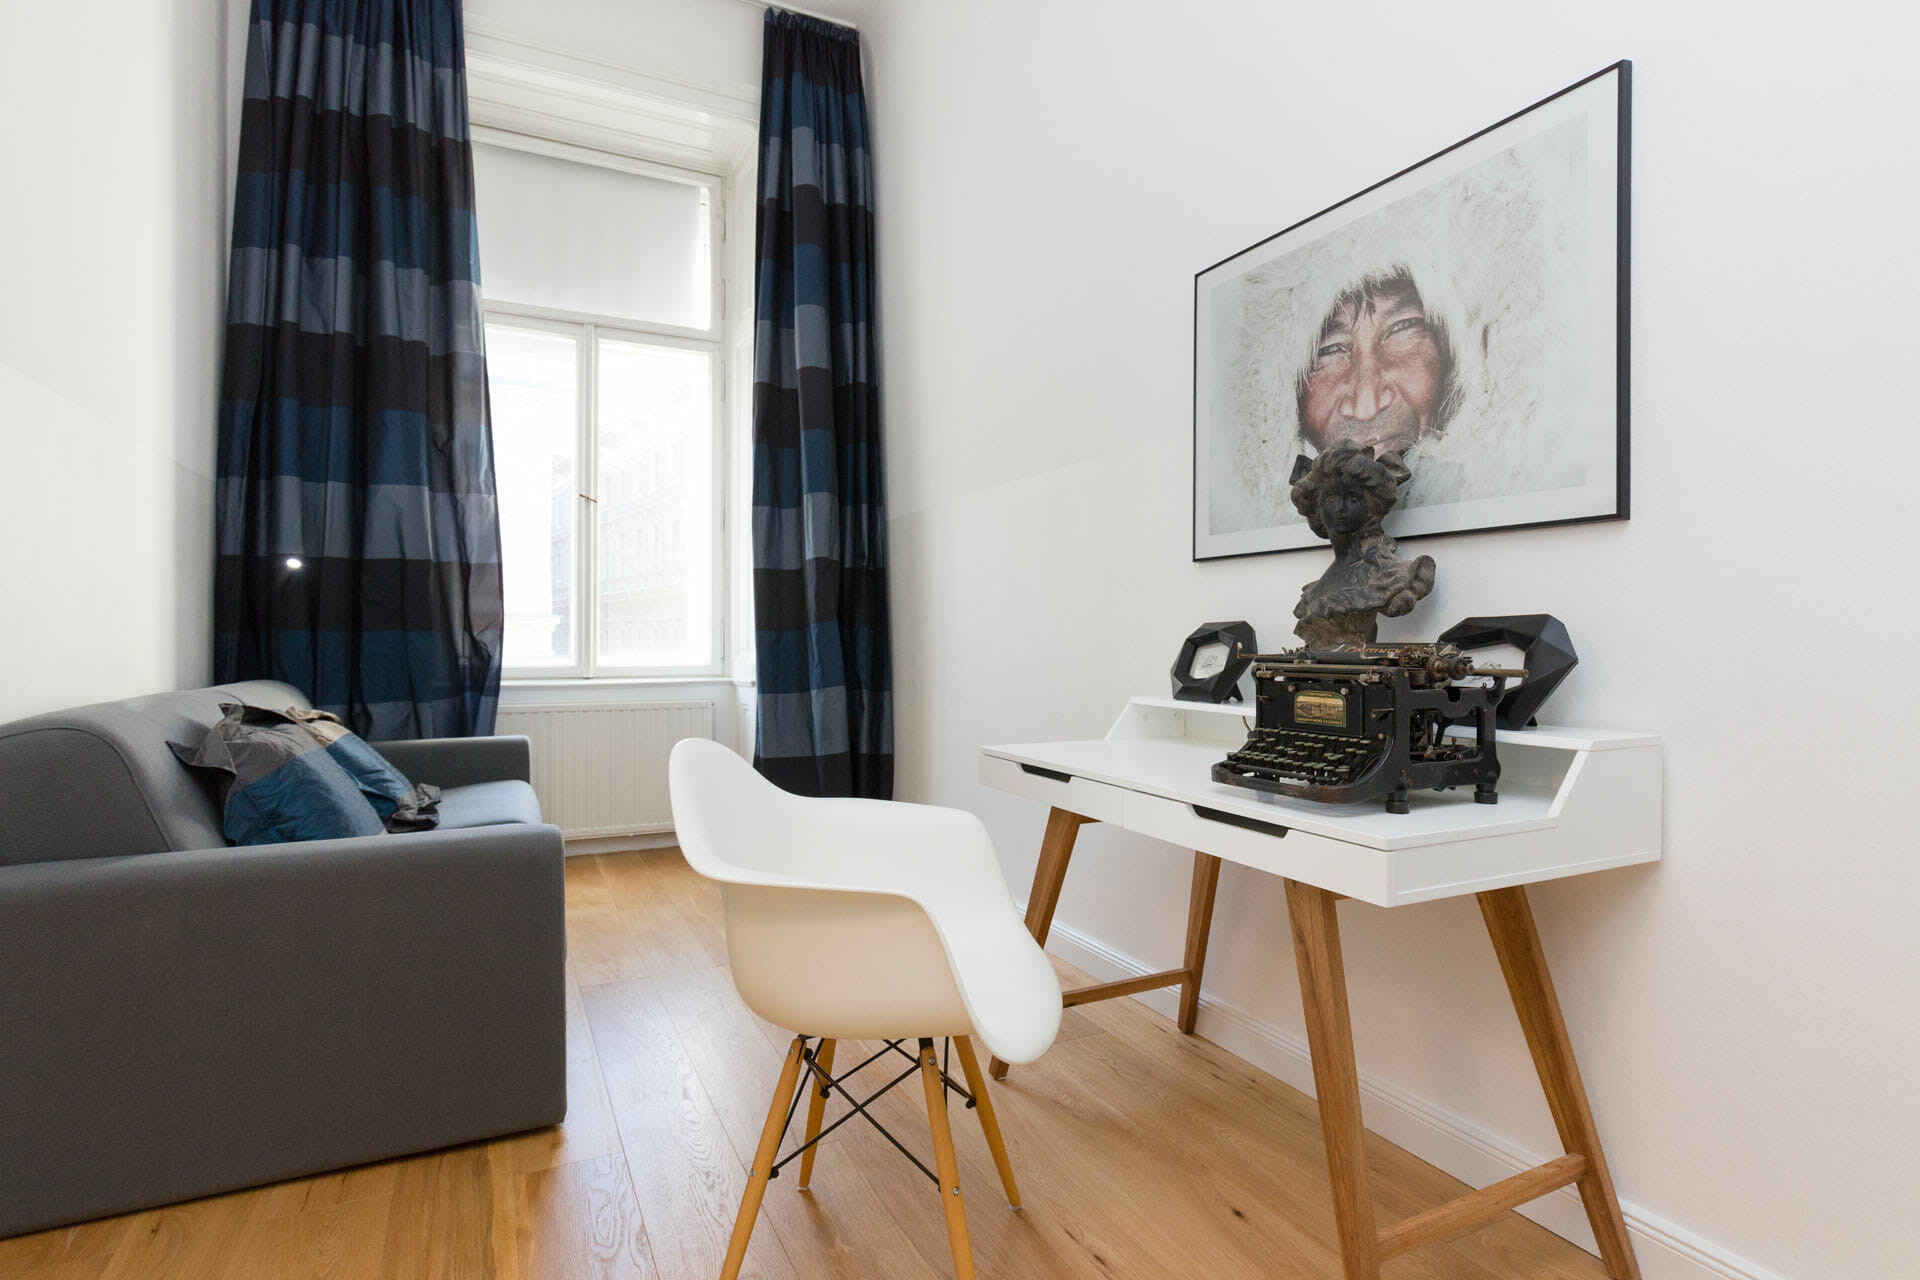 Pure Luxury in the Center of Vienna. First class 3 bedroom luxury apartment with space for up to 6 people.Apartments size in m²: 140
District: 1010 Inner City
Bedroom: 3. Internet, Digital Cable TV,